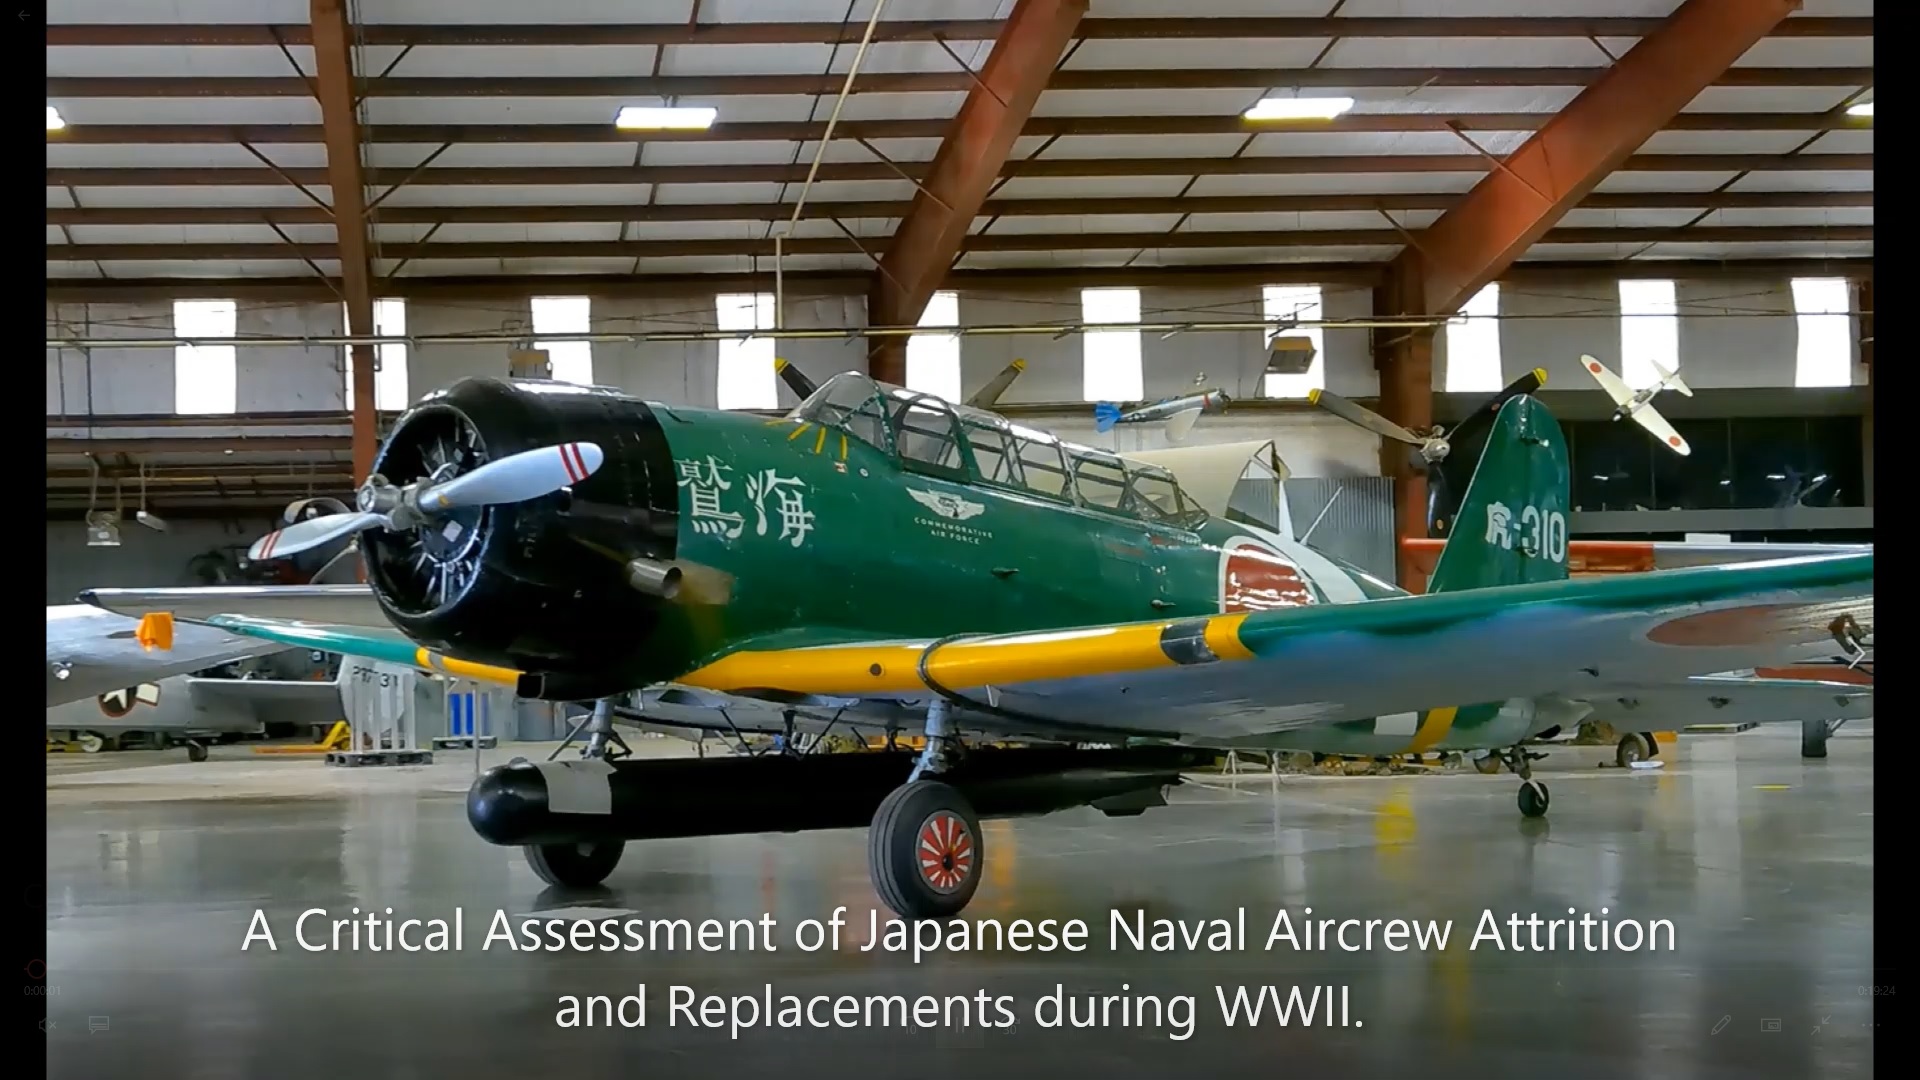 Showcase Image for A Critical Assessment of Japanese Naval Aircrew Attrition and Replacements during WWII.